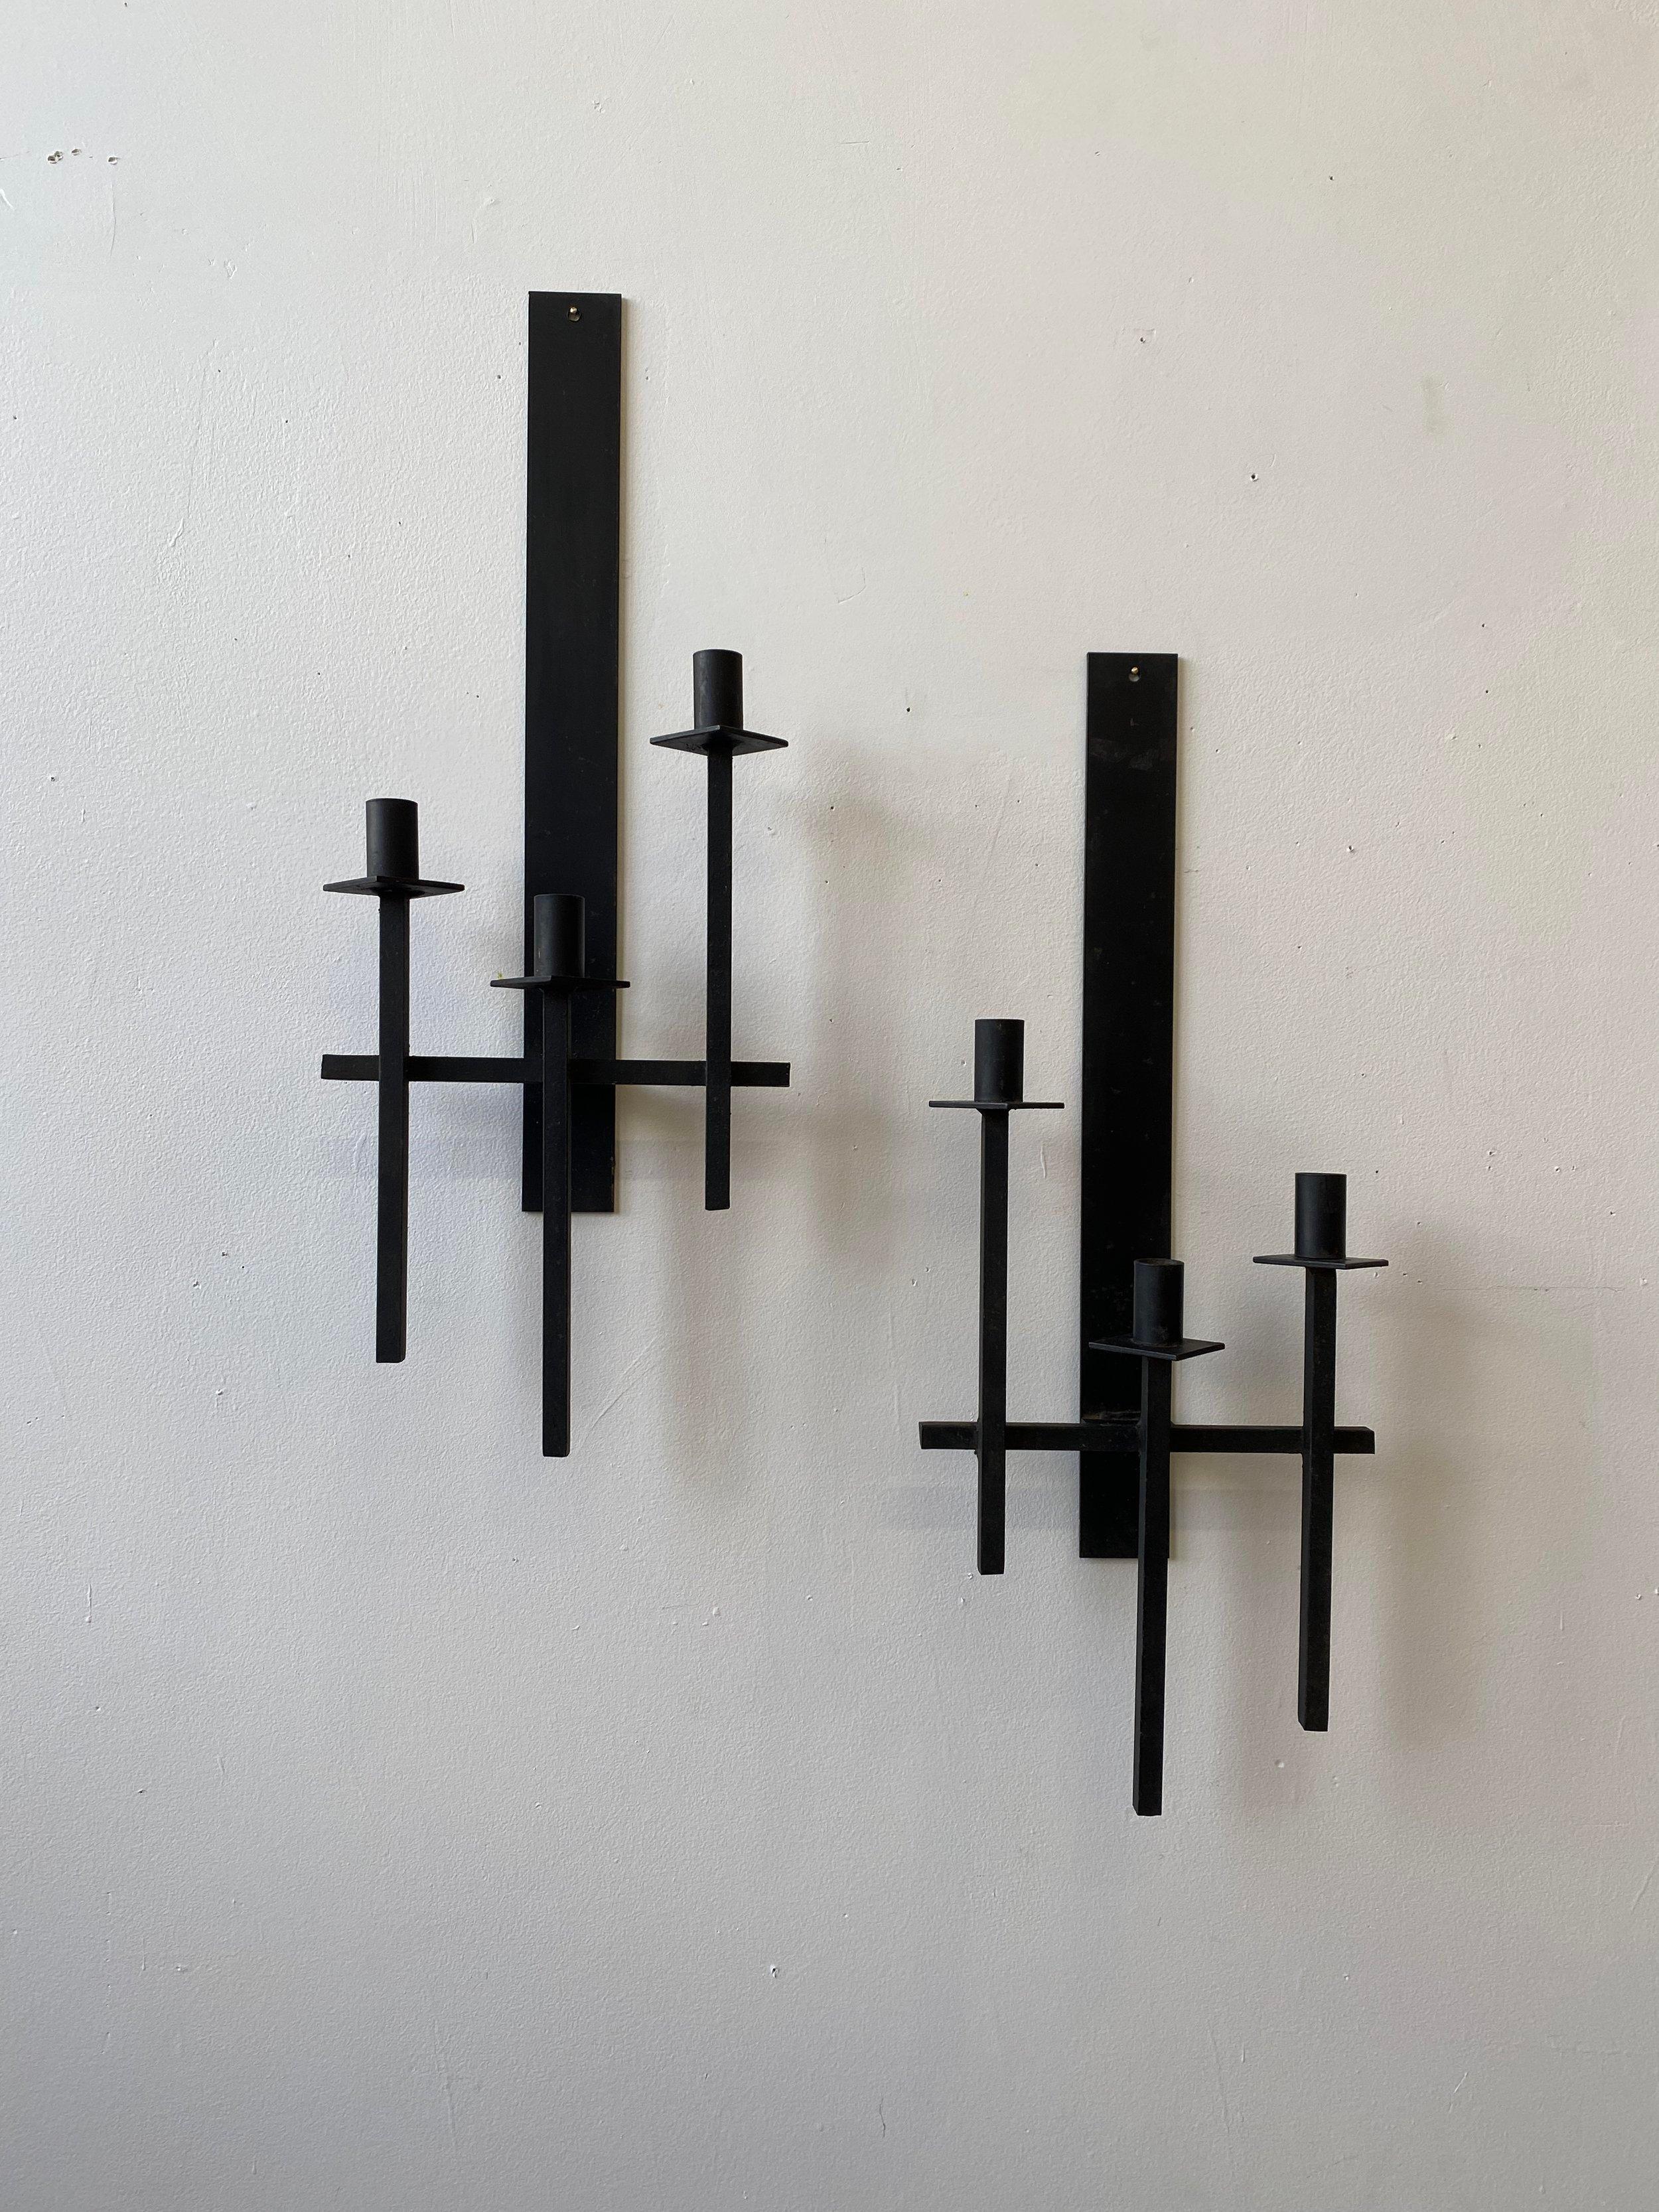 Vintage Wrought Iron Candelabra Wall Sconces by Van Keppel-Green, A Pair, Circa 1960s. Brutalist in design, these wall sconces are formed from square-cut rods of wrought iron. Each piece holds 3 candles staggered along the frame. Unsigned.

“Van